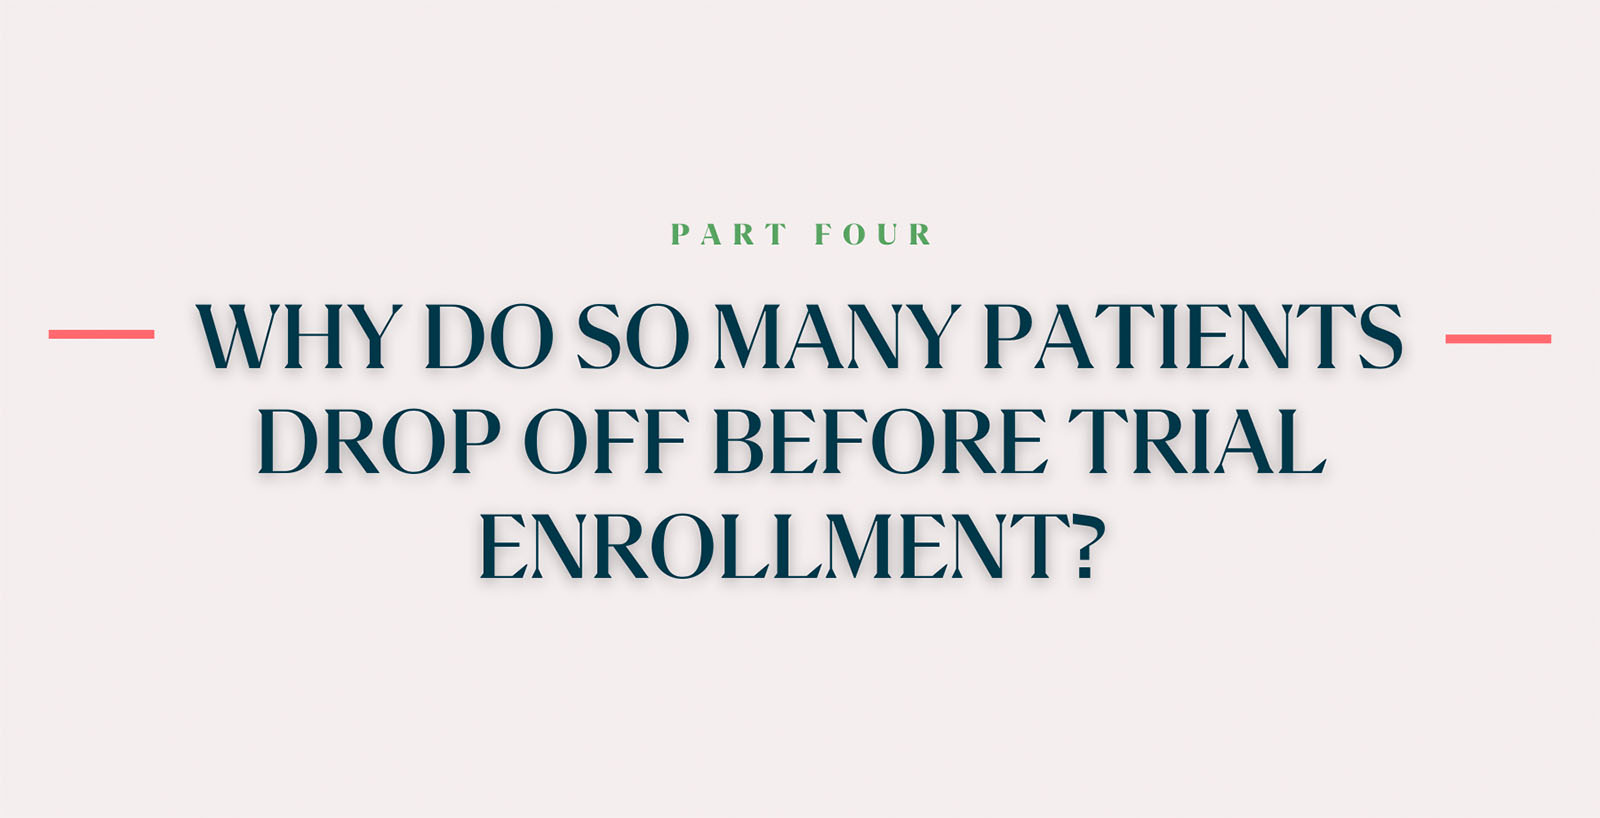 Why Do So Many Patients Drop Off Before Trial Enrollment?